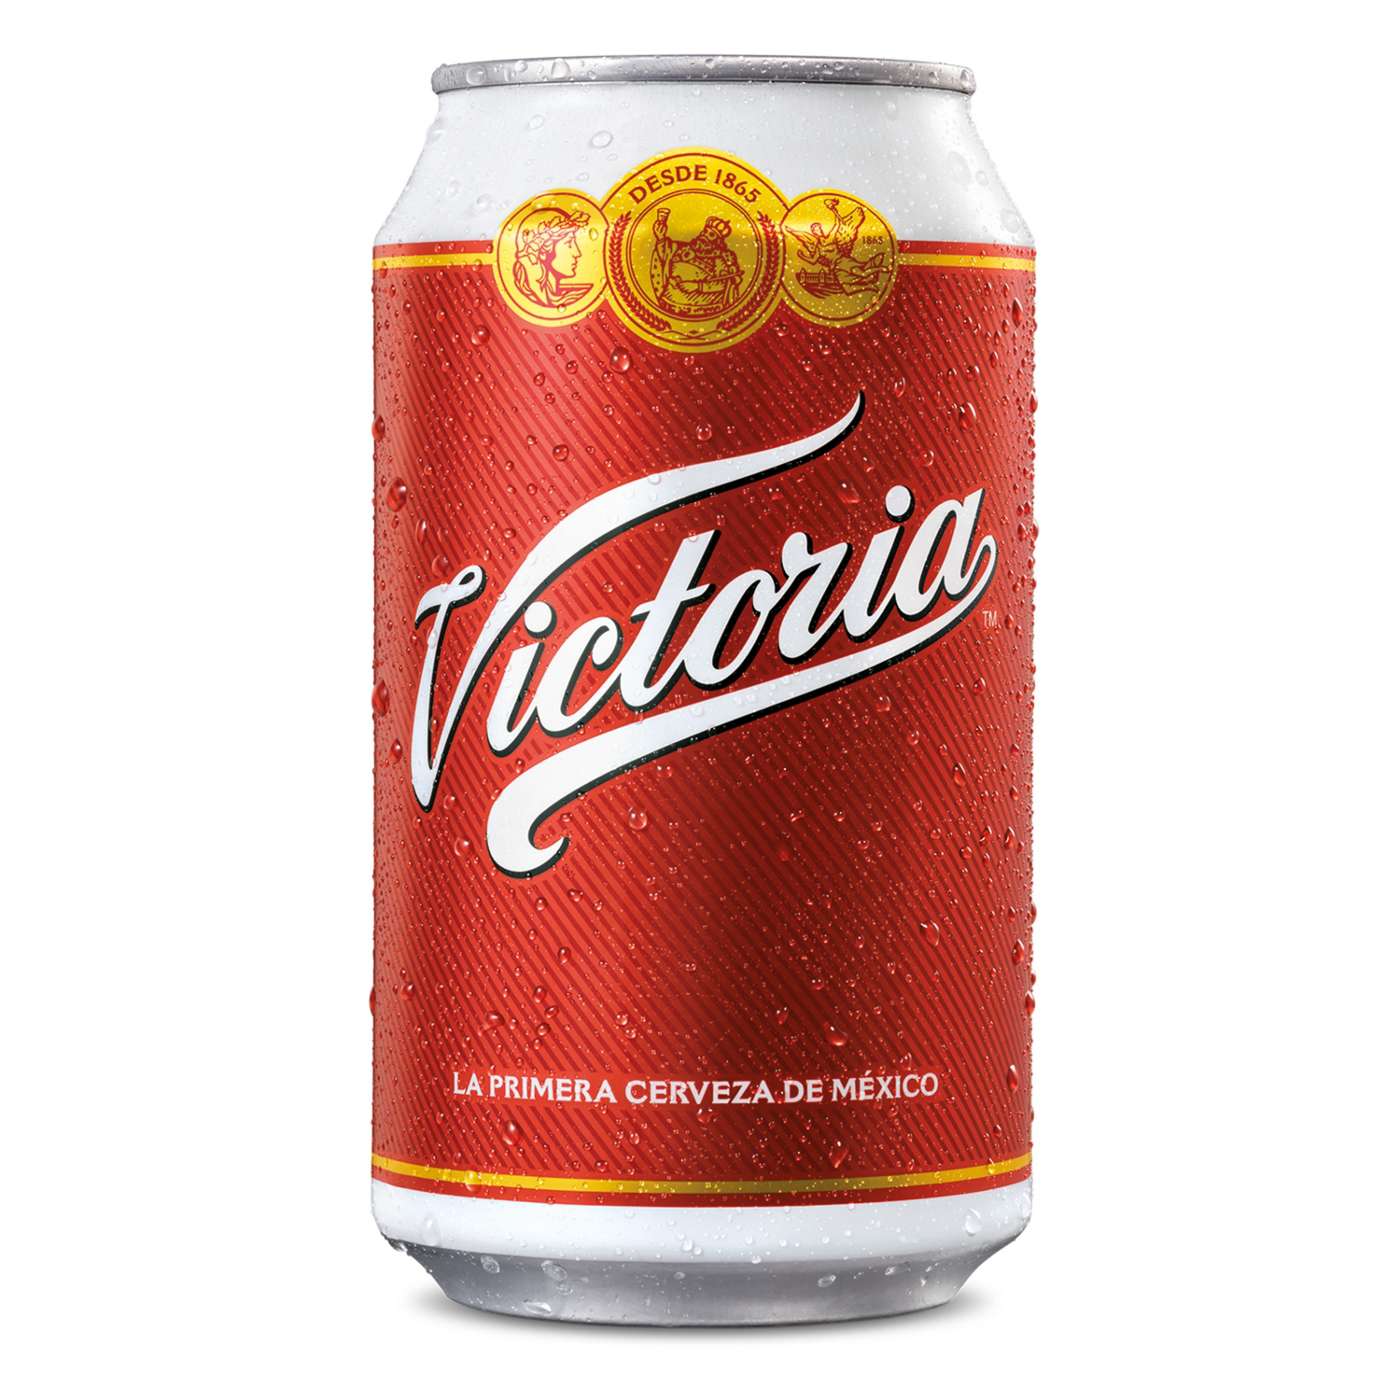 Victoria Amber Lager Mexican Beer 12 oz Cans, 12 pk; image 4 of 8